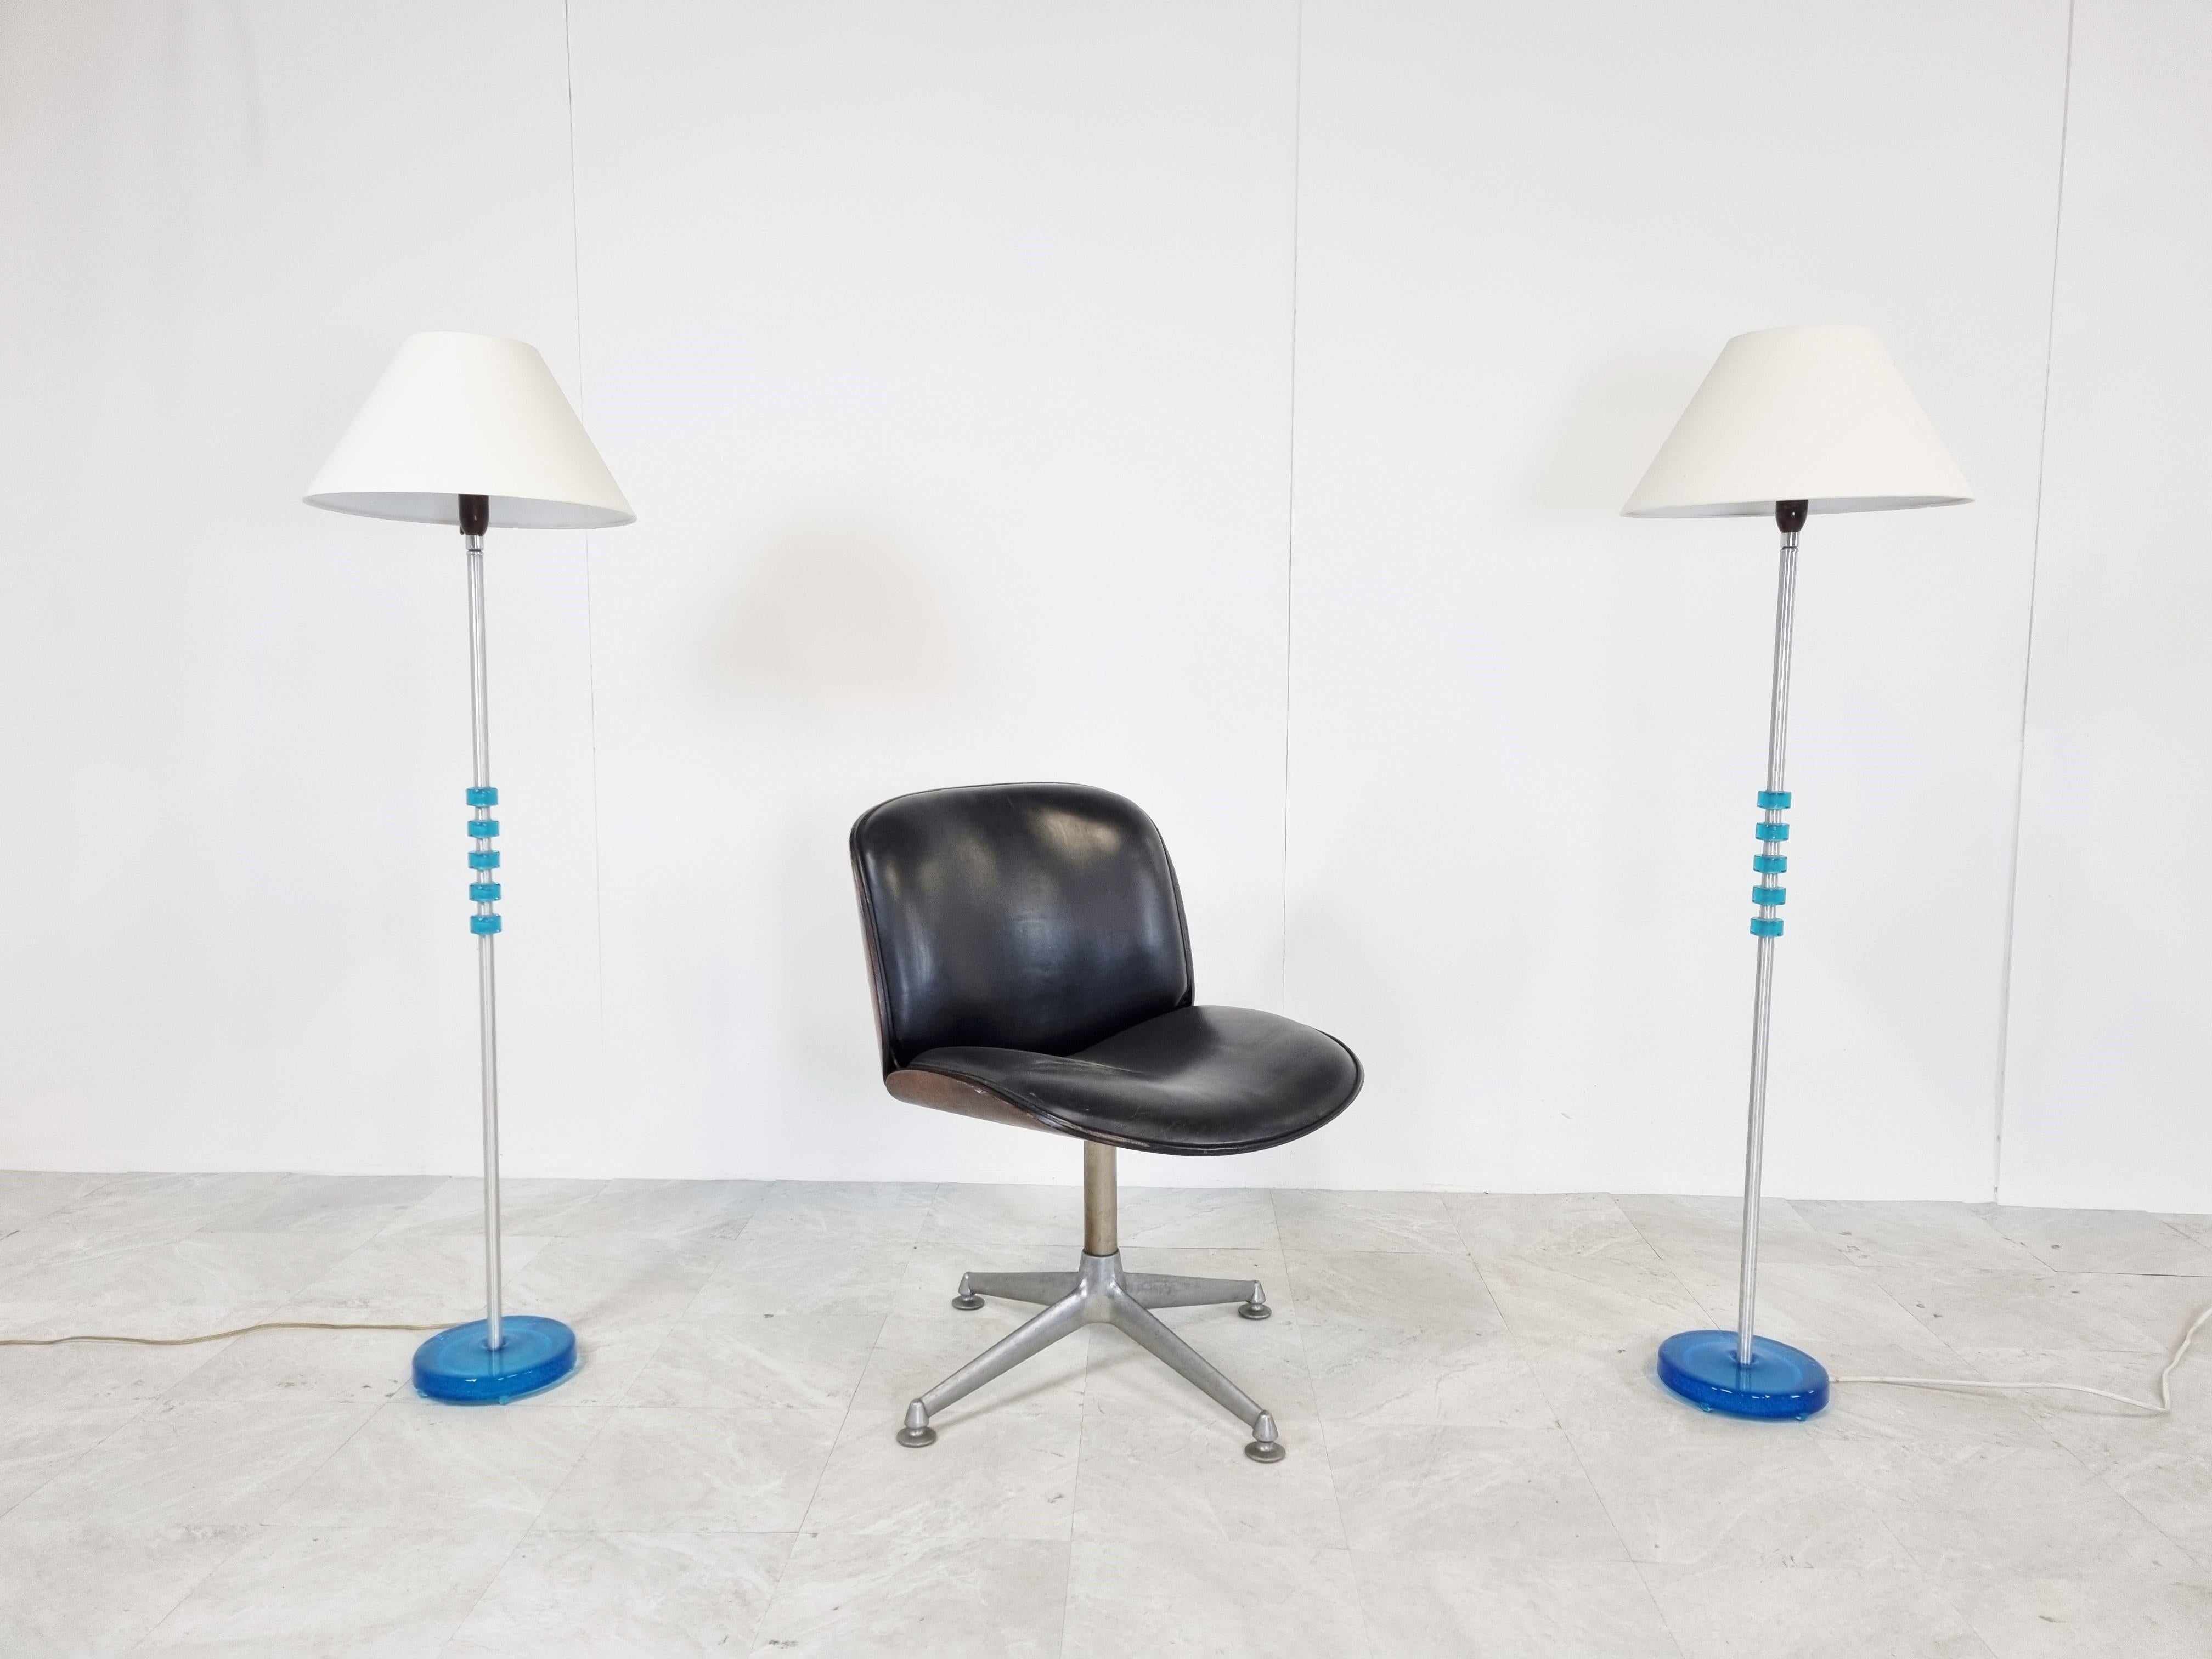 Mid-century swedish blue glass floor lamps designed by Carl Fagerlund and produced by Orrefors.

Striking blue coloured glass with a brushed metal rod and the original bakeliste sockets with switches.

Elegant floor lamps which stand strong as a